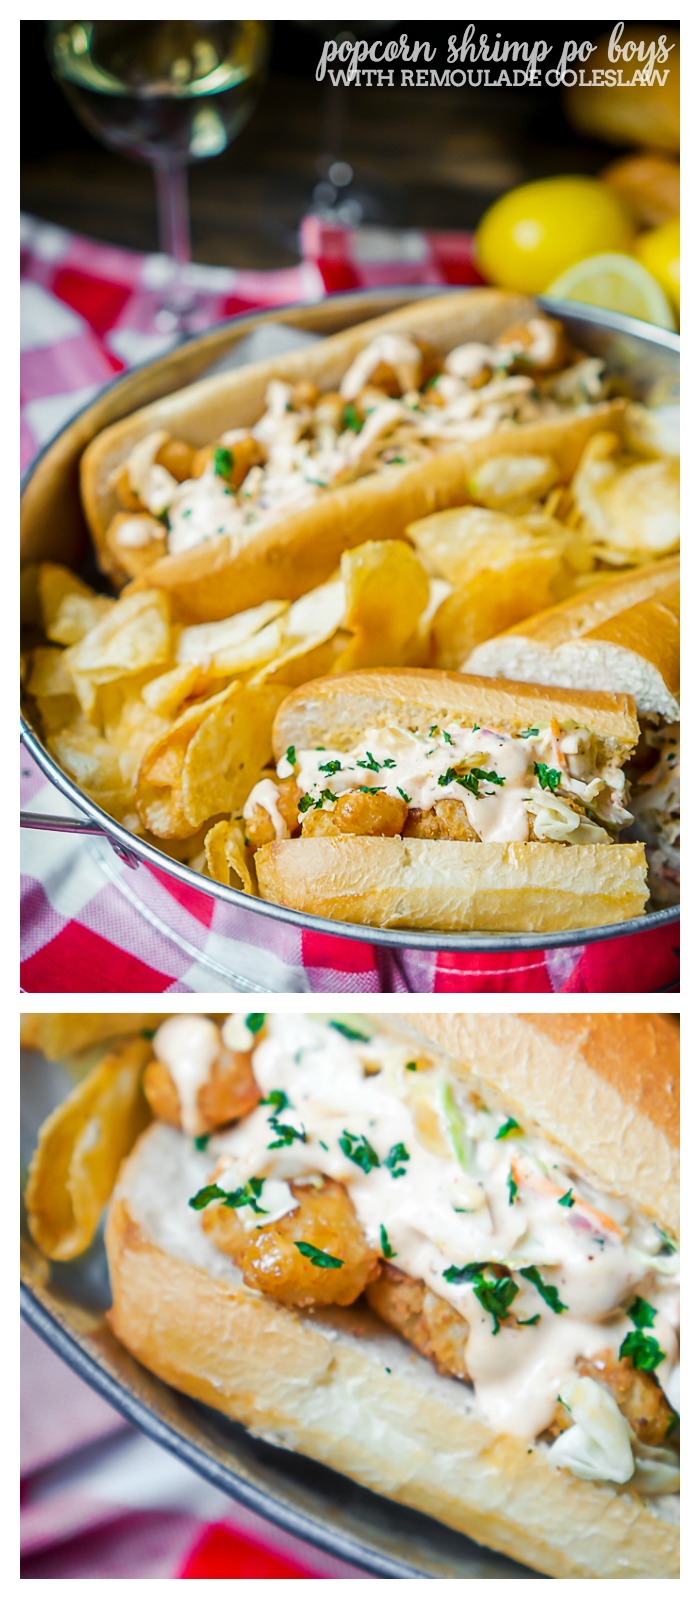 Popcorn Shrimp Po Boys Recipe with Remoulade Coleslaw - {Msg 4 21+} Easy dinner twist on classic New Orleans' sandwich recipe. Ready in 15 minutes with tons of flavor! | The Love Nerds AD #40PerfectPairings